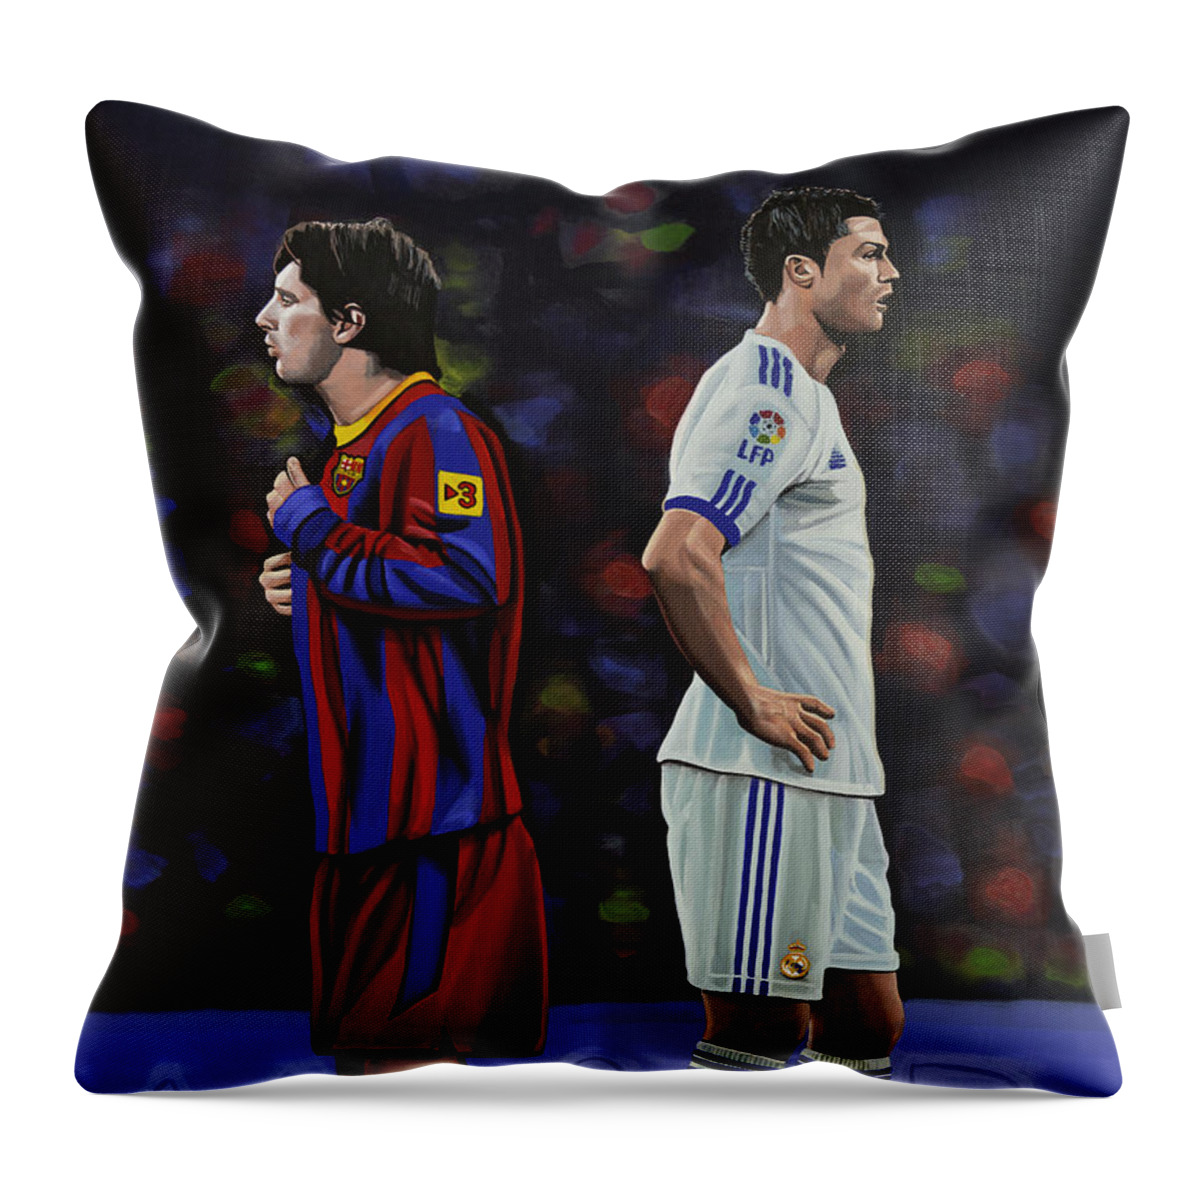 Lionel Messi Cristiano Ronaldo Sport Real Madrid Fc Barcelona Barca Real Manchester United Uefa Champions League Champions Soccer Player Ballon D Or Olympic Games Portugal Portuguese Footballer Famous People Superstar Glamour Icon Idol Hero Paul Meijering Star Realism Portrait Argentina Acrylic Painting Football Stadium Grass Manchester United Forward Work Of Art Fifa World Cup The Classic El Clasico Argentine Footballer Estadio Santiago Berrnabeu Camp Nou Throw Pillow featuring the painting Lionel Messi and Cristiano Ronaldo by Paul Meijering